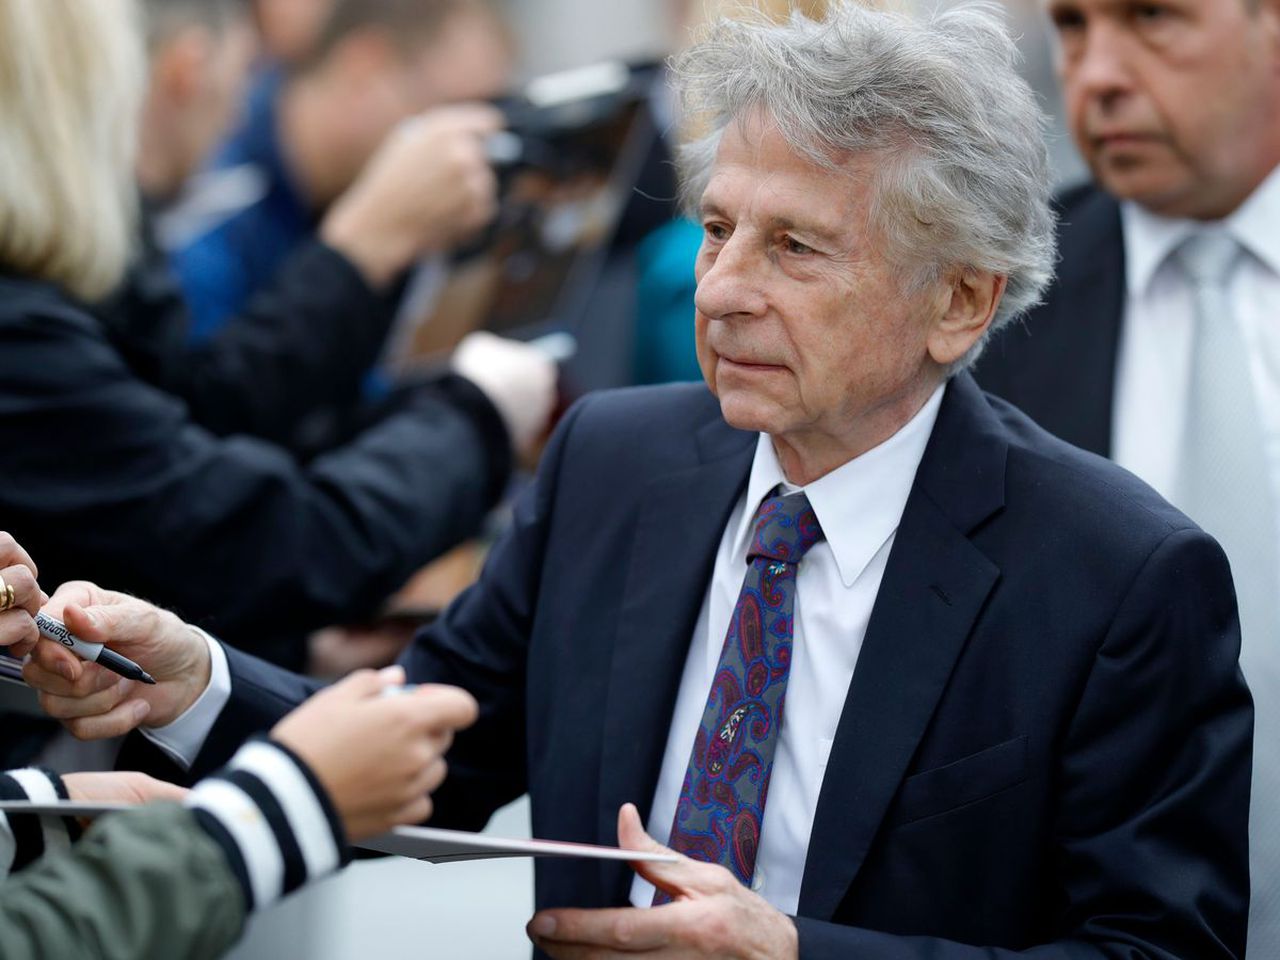 Polanski cannot return to the US without being arrested, image via Getty Images